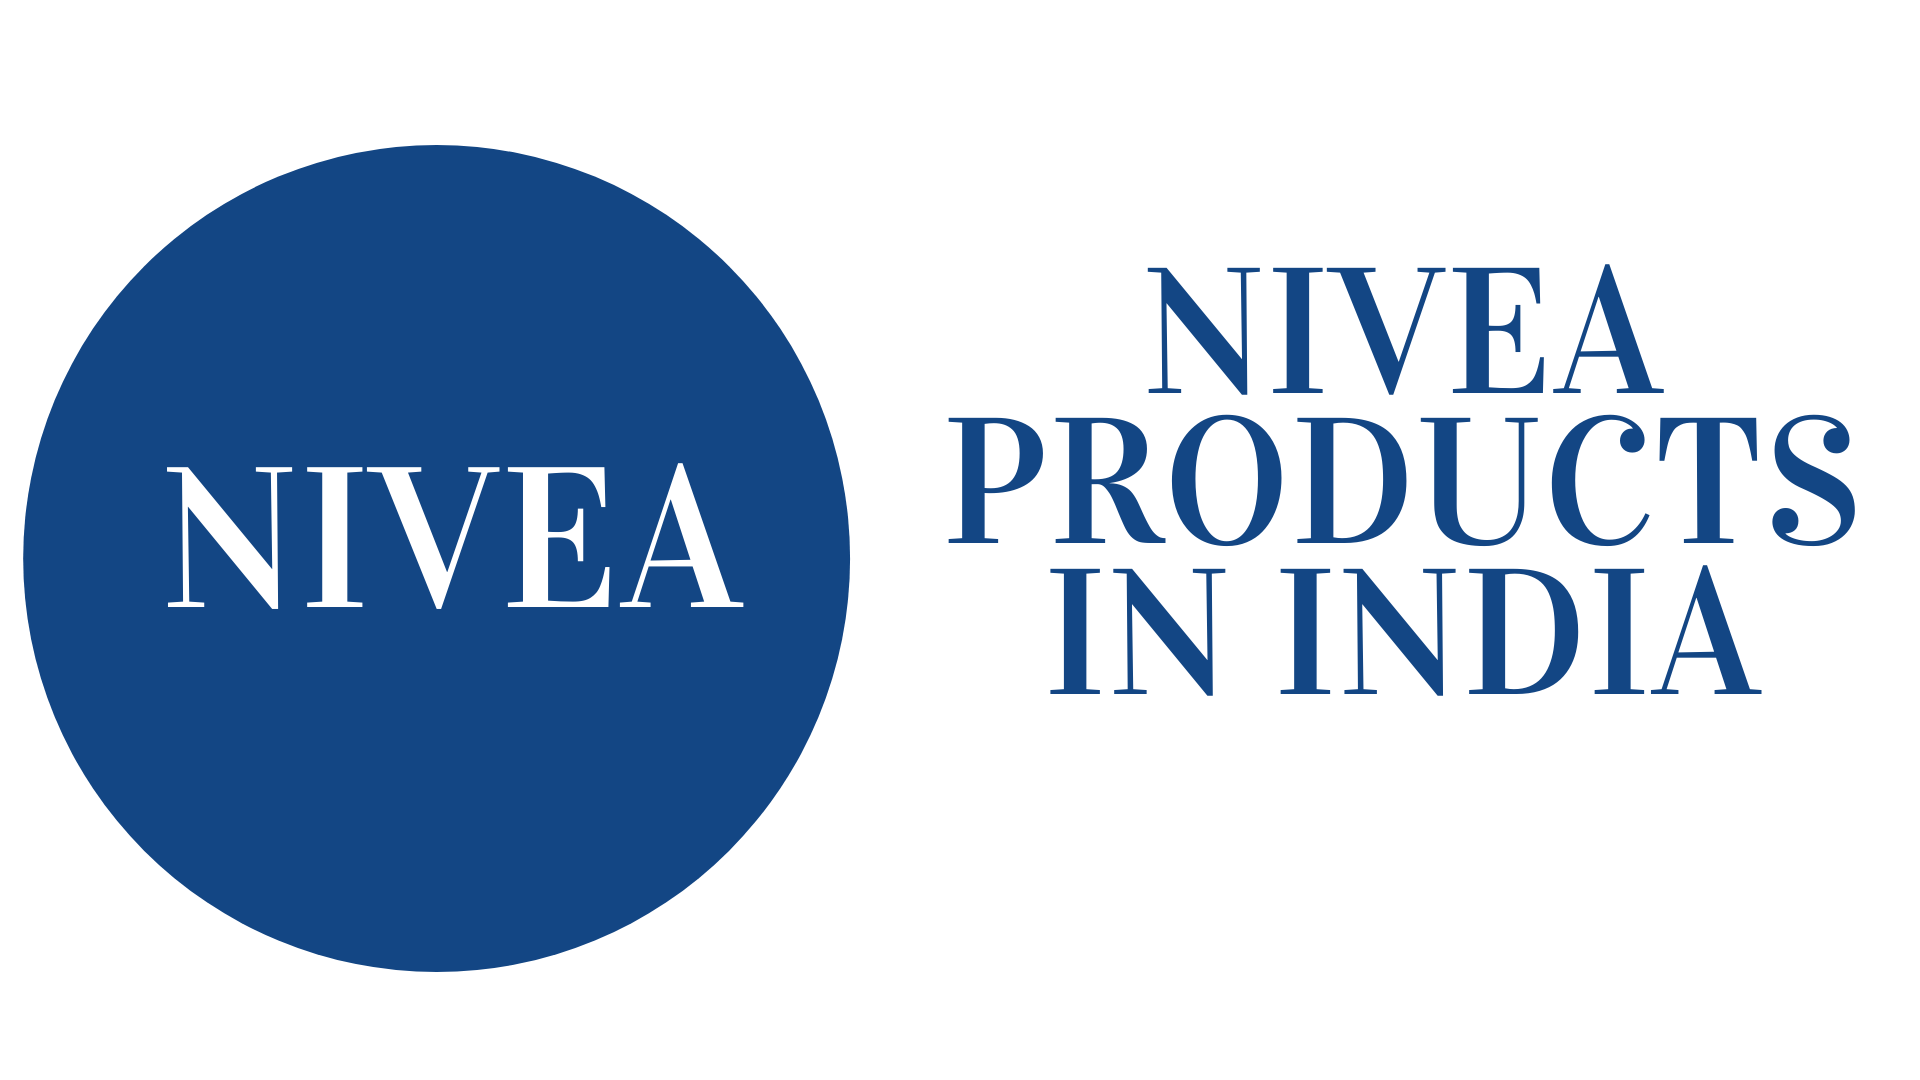 bestseller nivea products in india